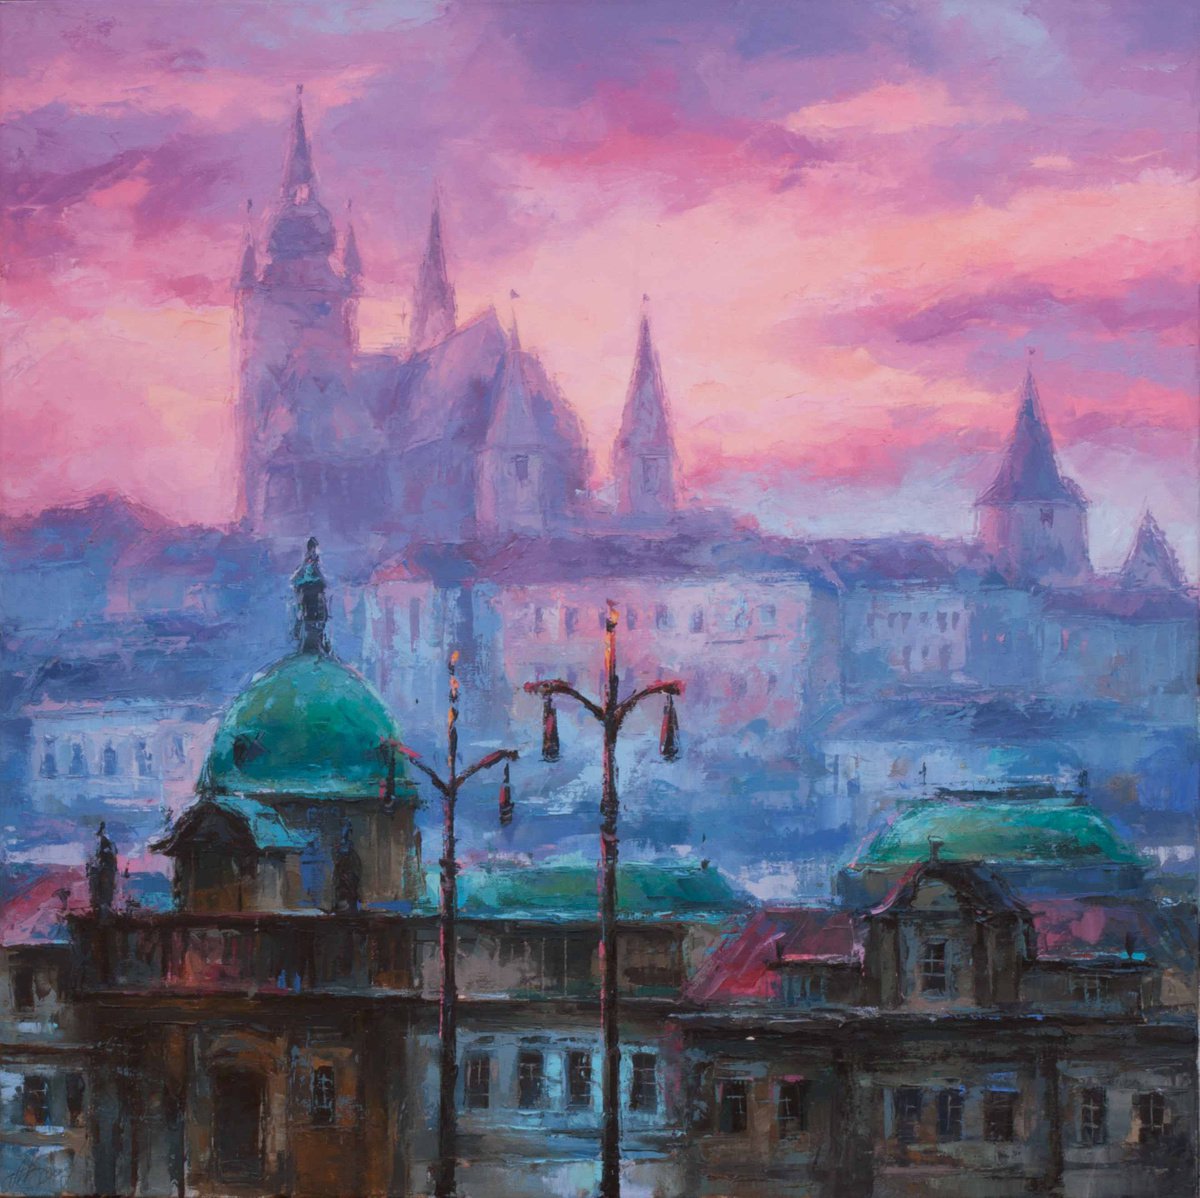 In the morning over the parliament by Alexandr Klemens